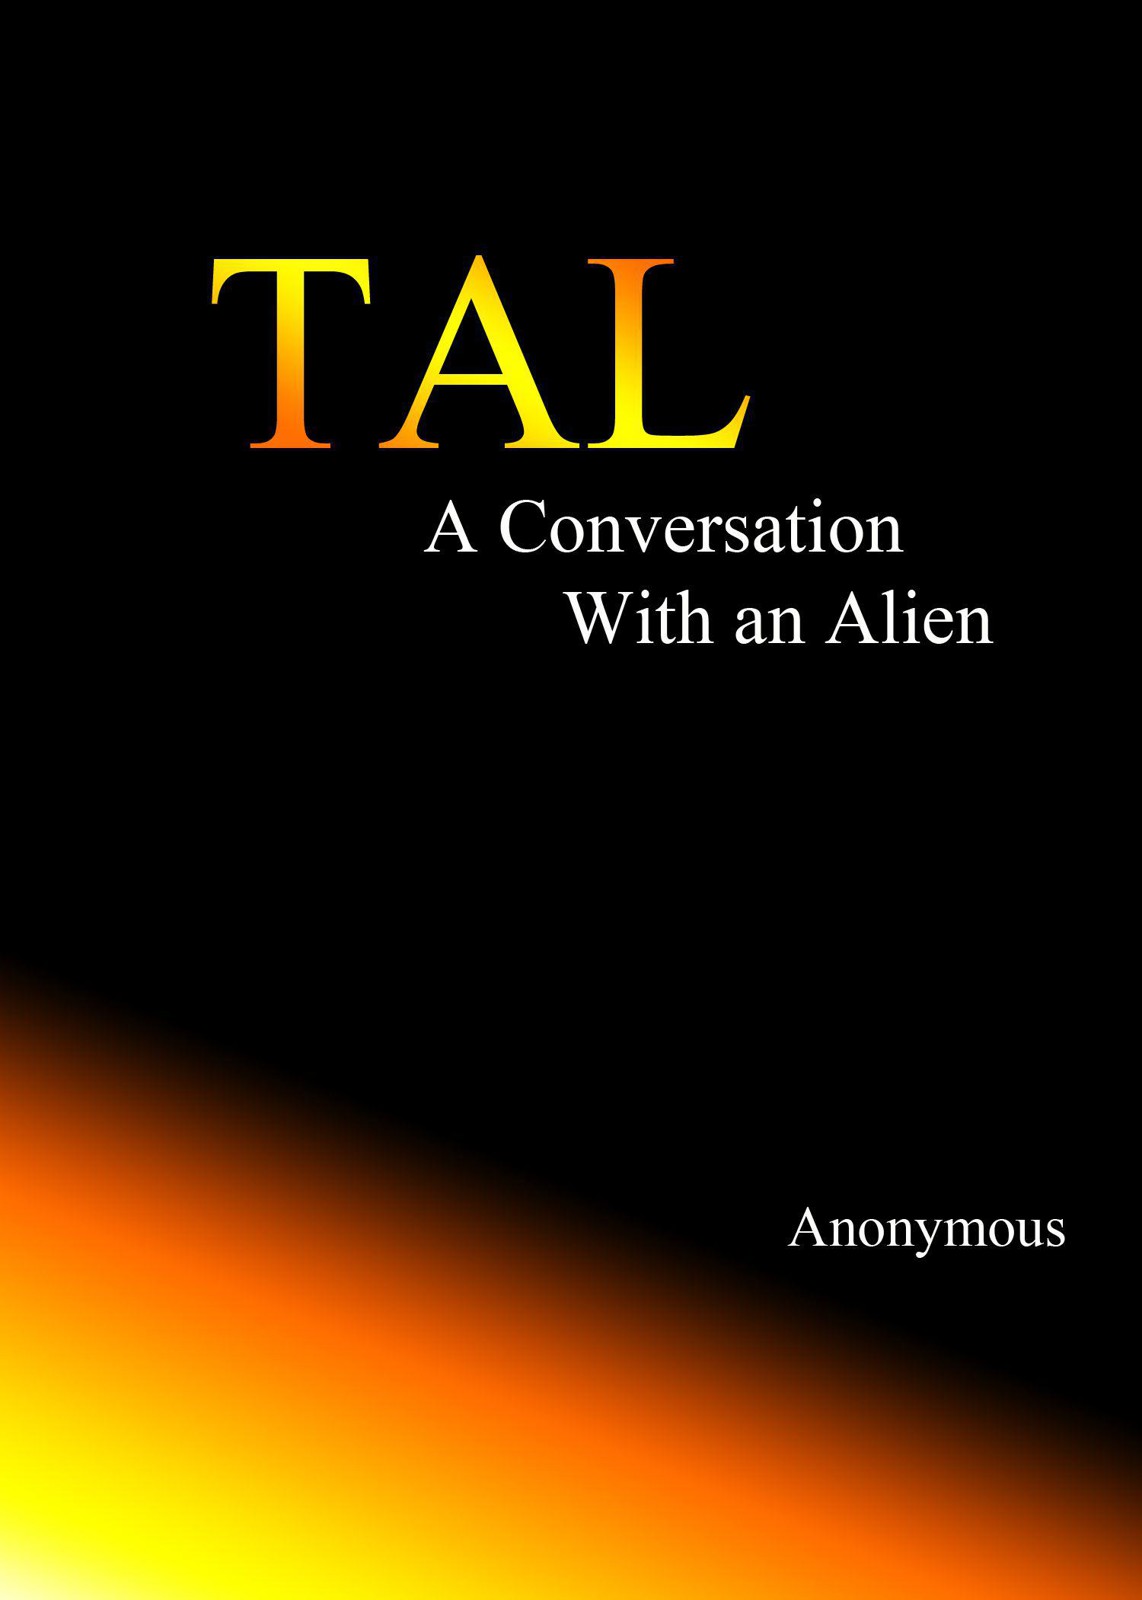 Tal, a conversation with an alien by Anonymous